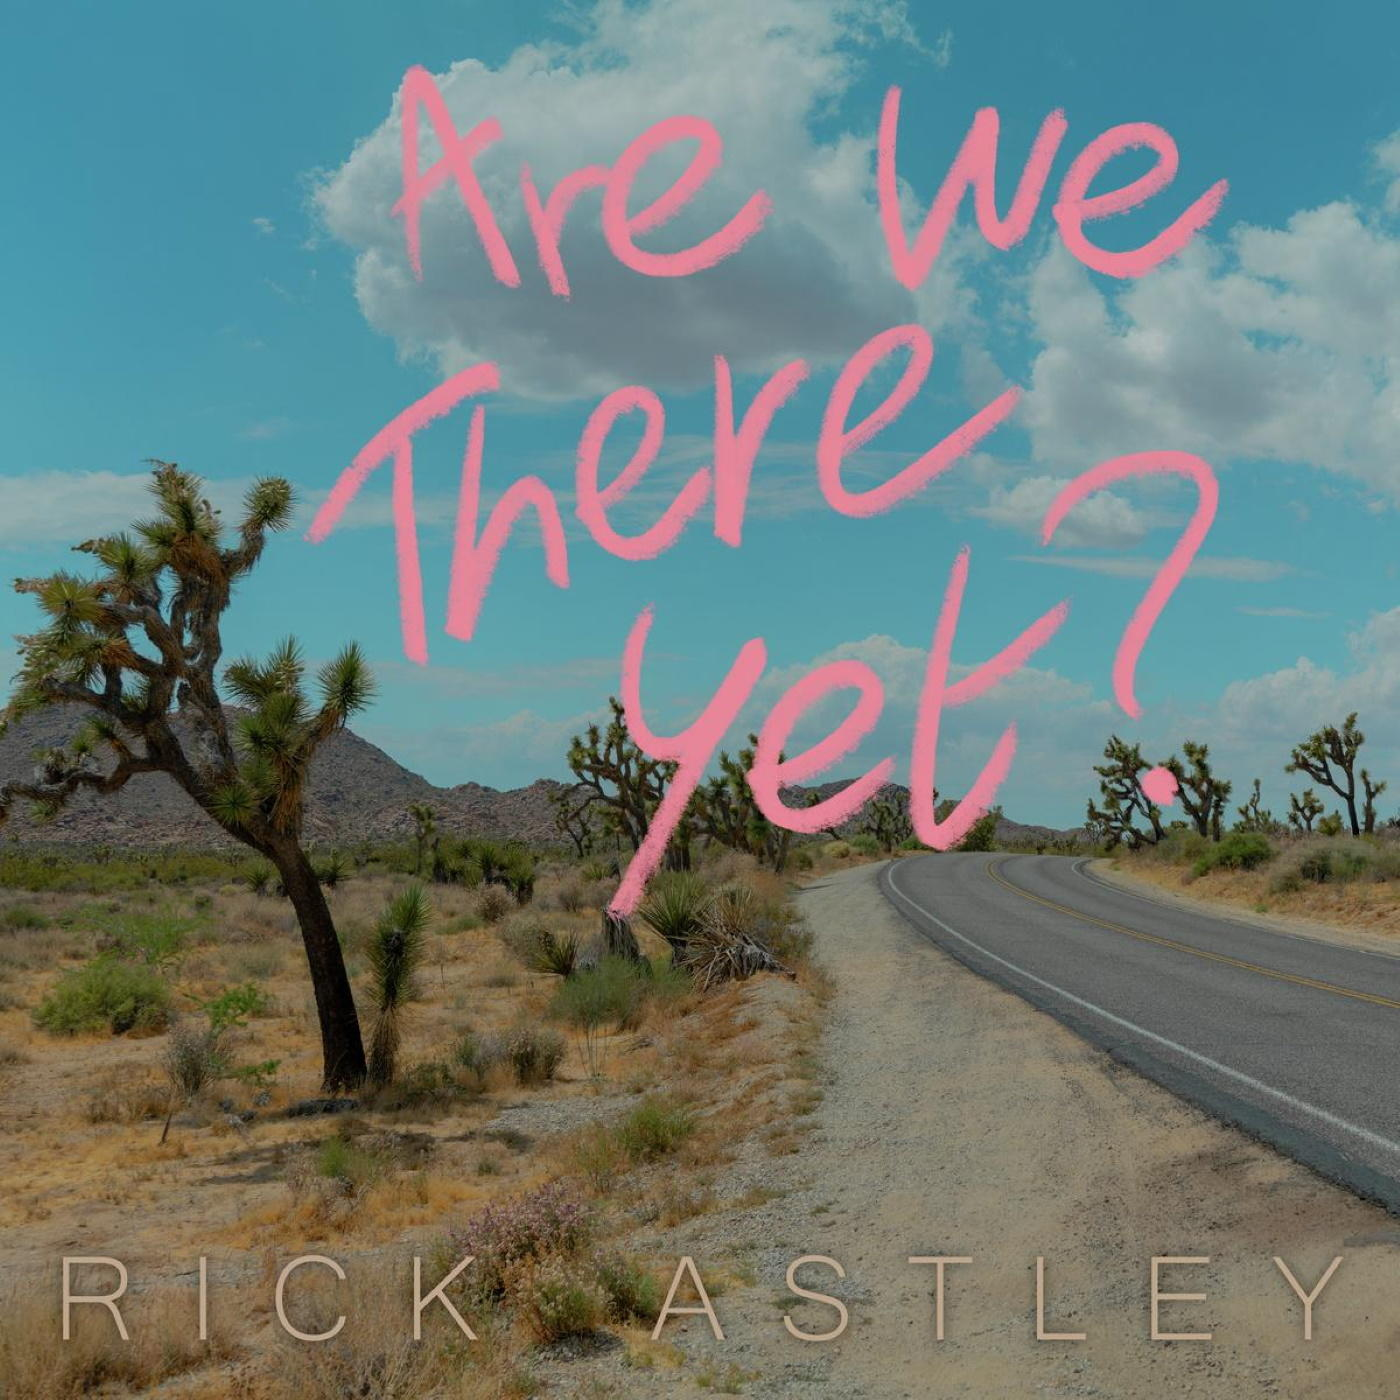 Rick Astley - Are We Clear - There Yet?(Ltd.Edition (Vinyl) Vinyl)